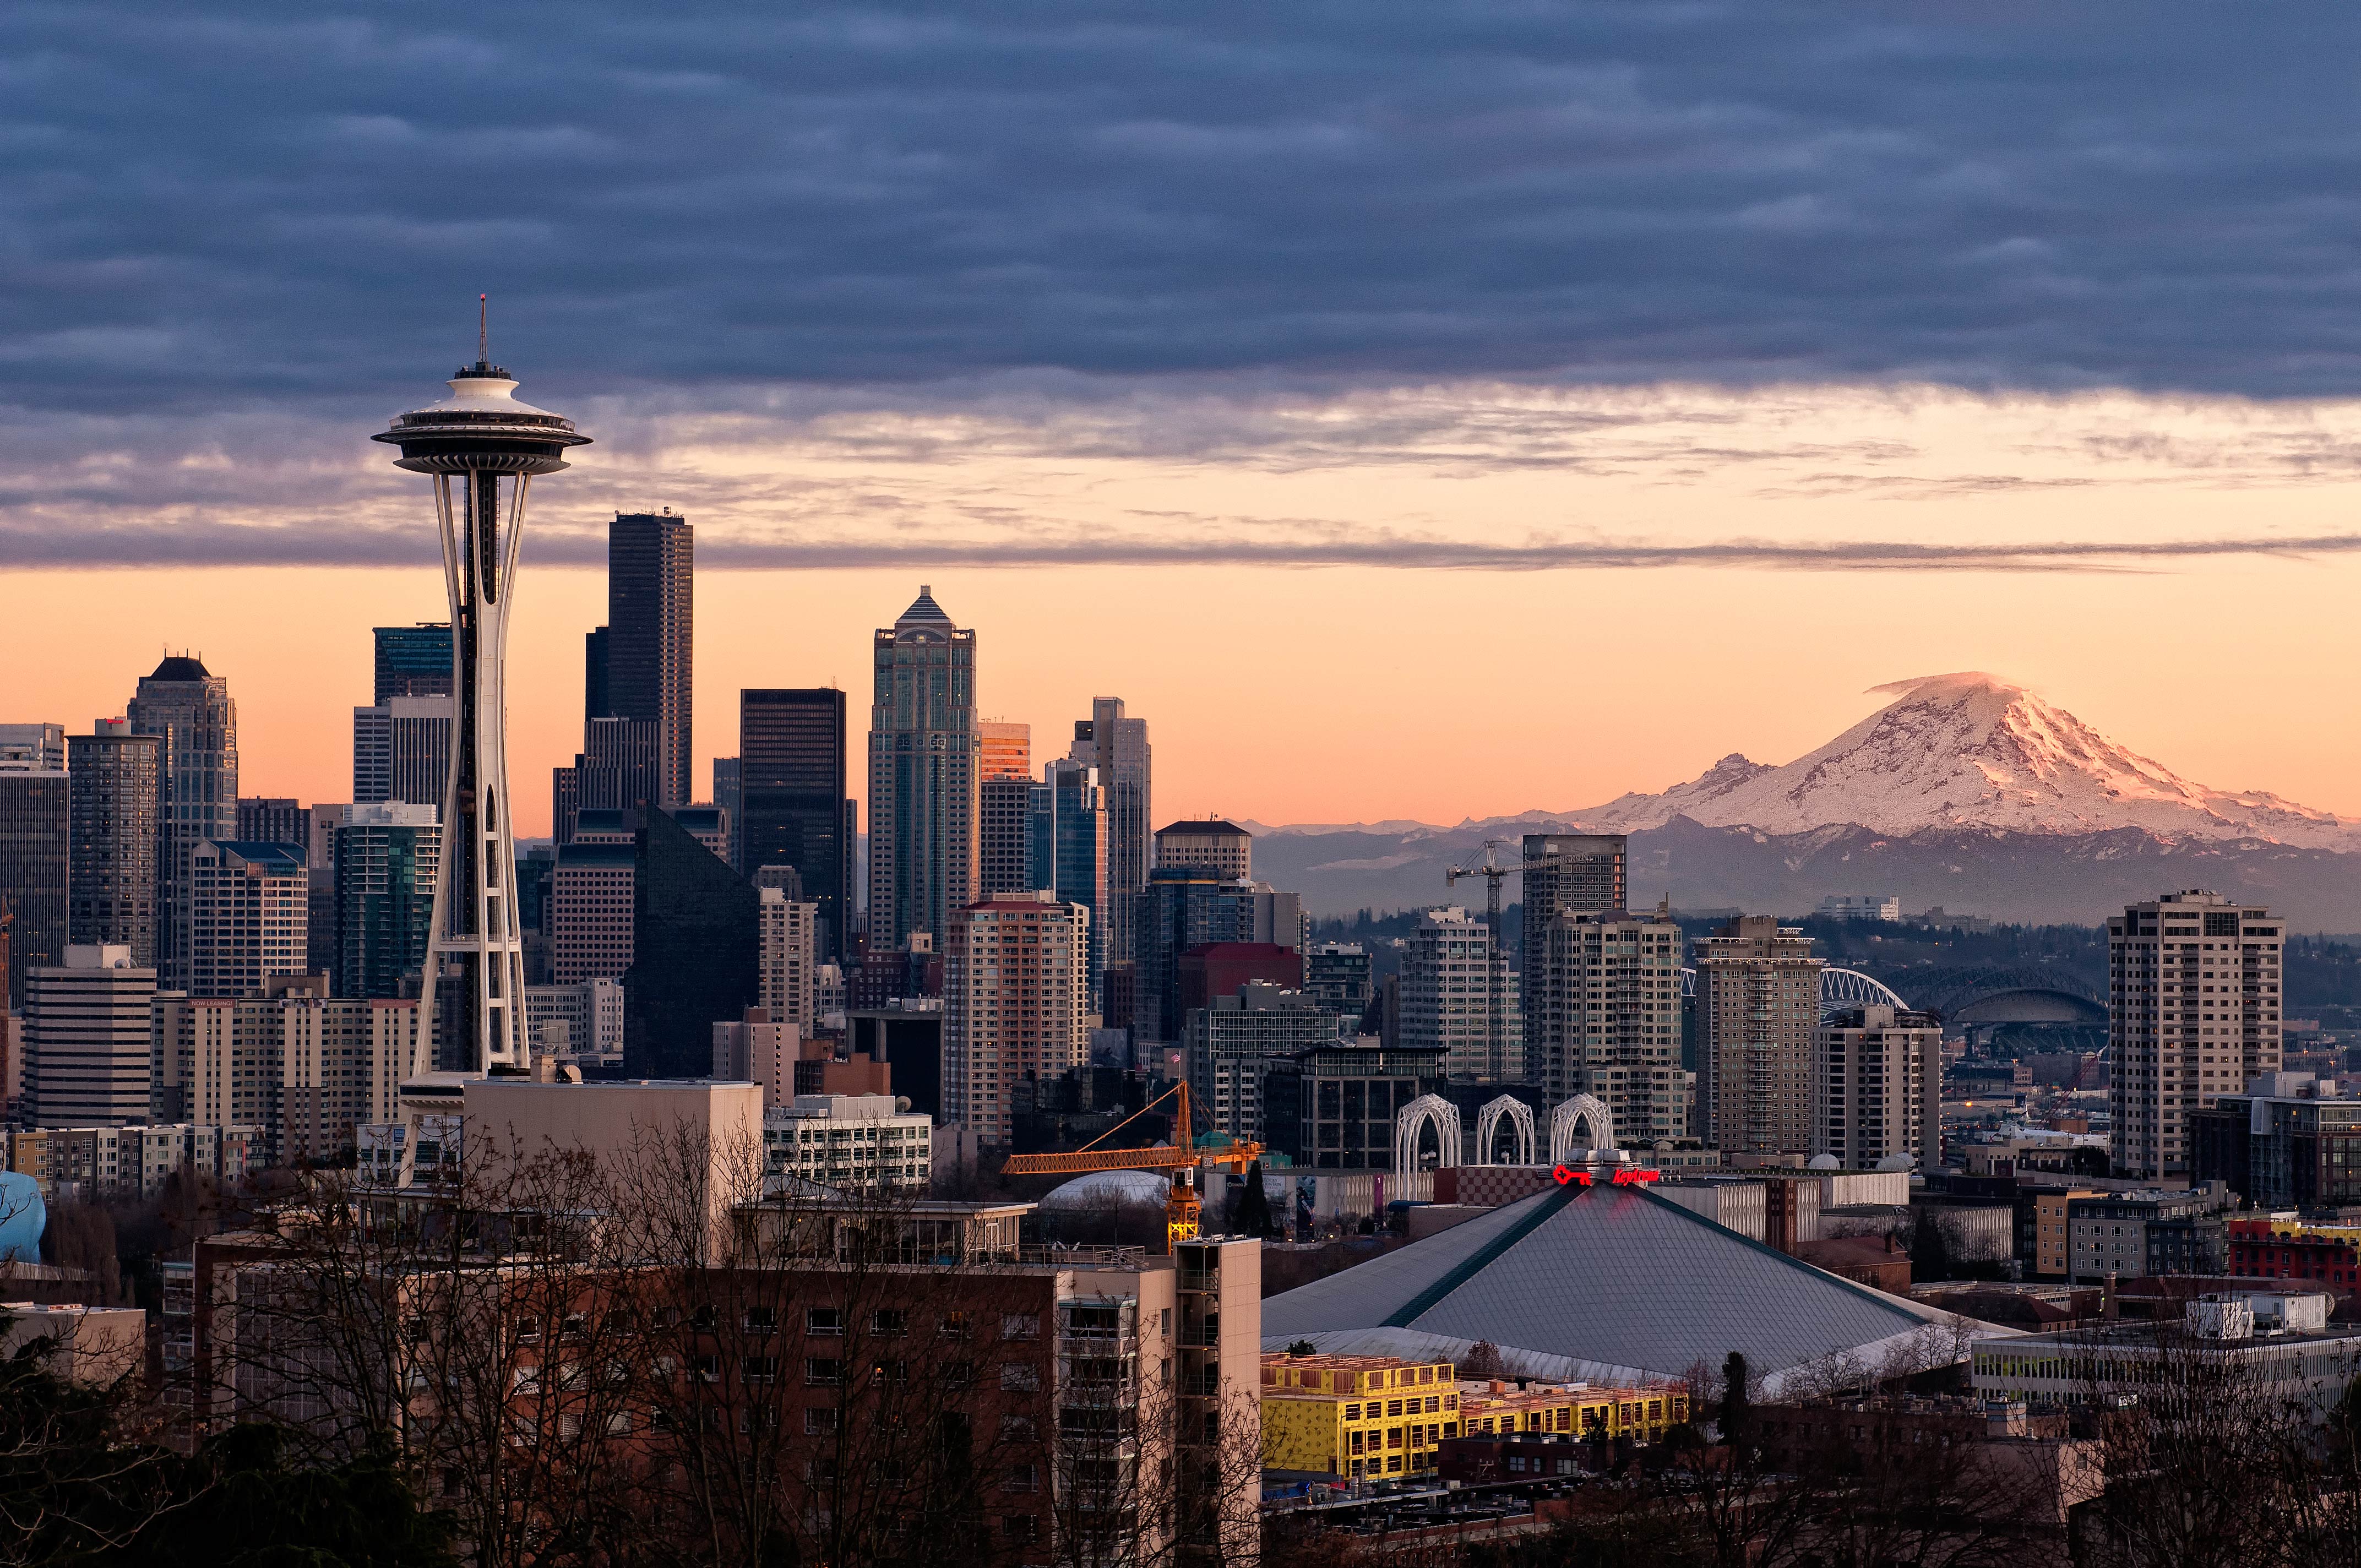 The Seattle skyline with Mt. Rainier in the distance. Image by Aaron Eakin / Getty